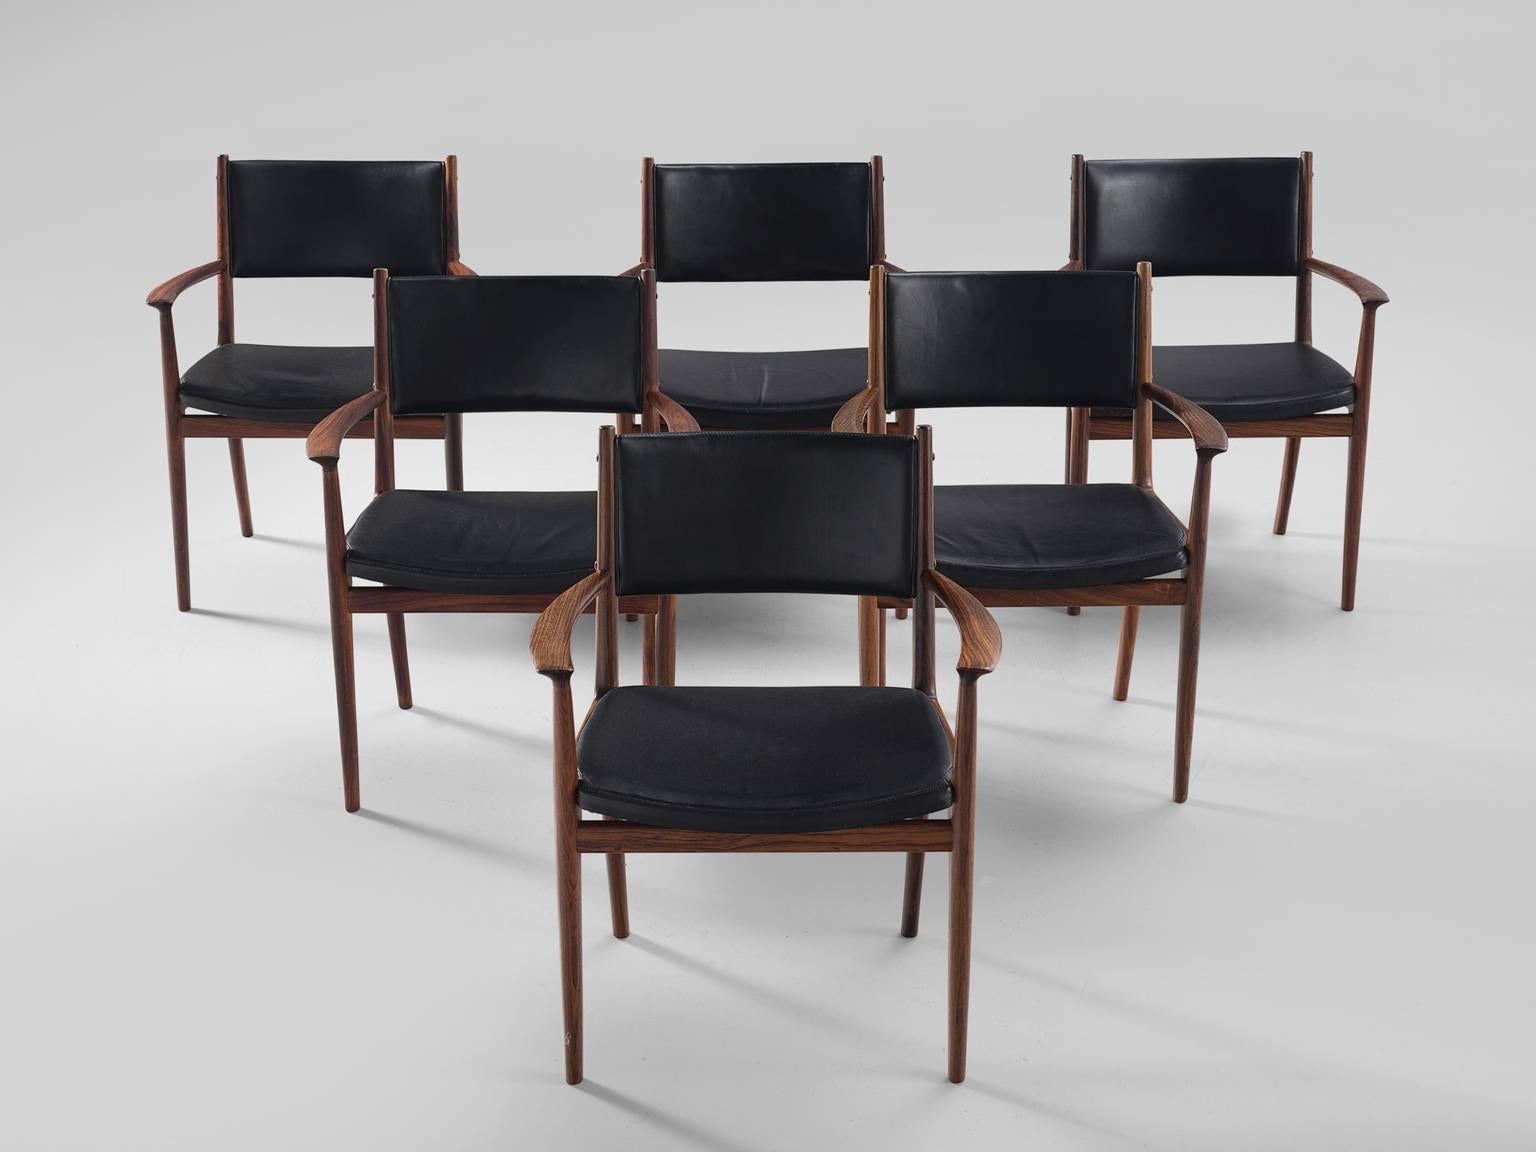 Kai Lyngfeldt Larsen for Soren Willadsen, set of six dining chairs in rosewood and black leatherette, Denmark, 1960s.

These comfortable dining chairs show wonderful craftsmanship. The black faux leather upholstery has aged in a beautiful way. The